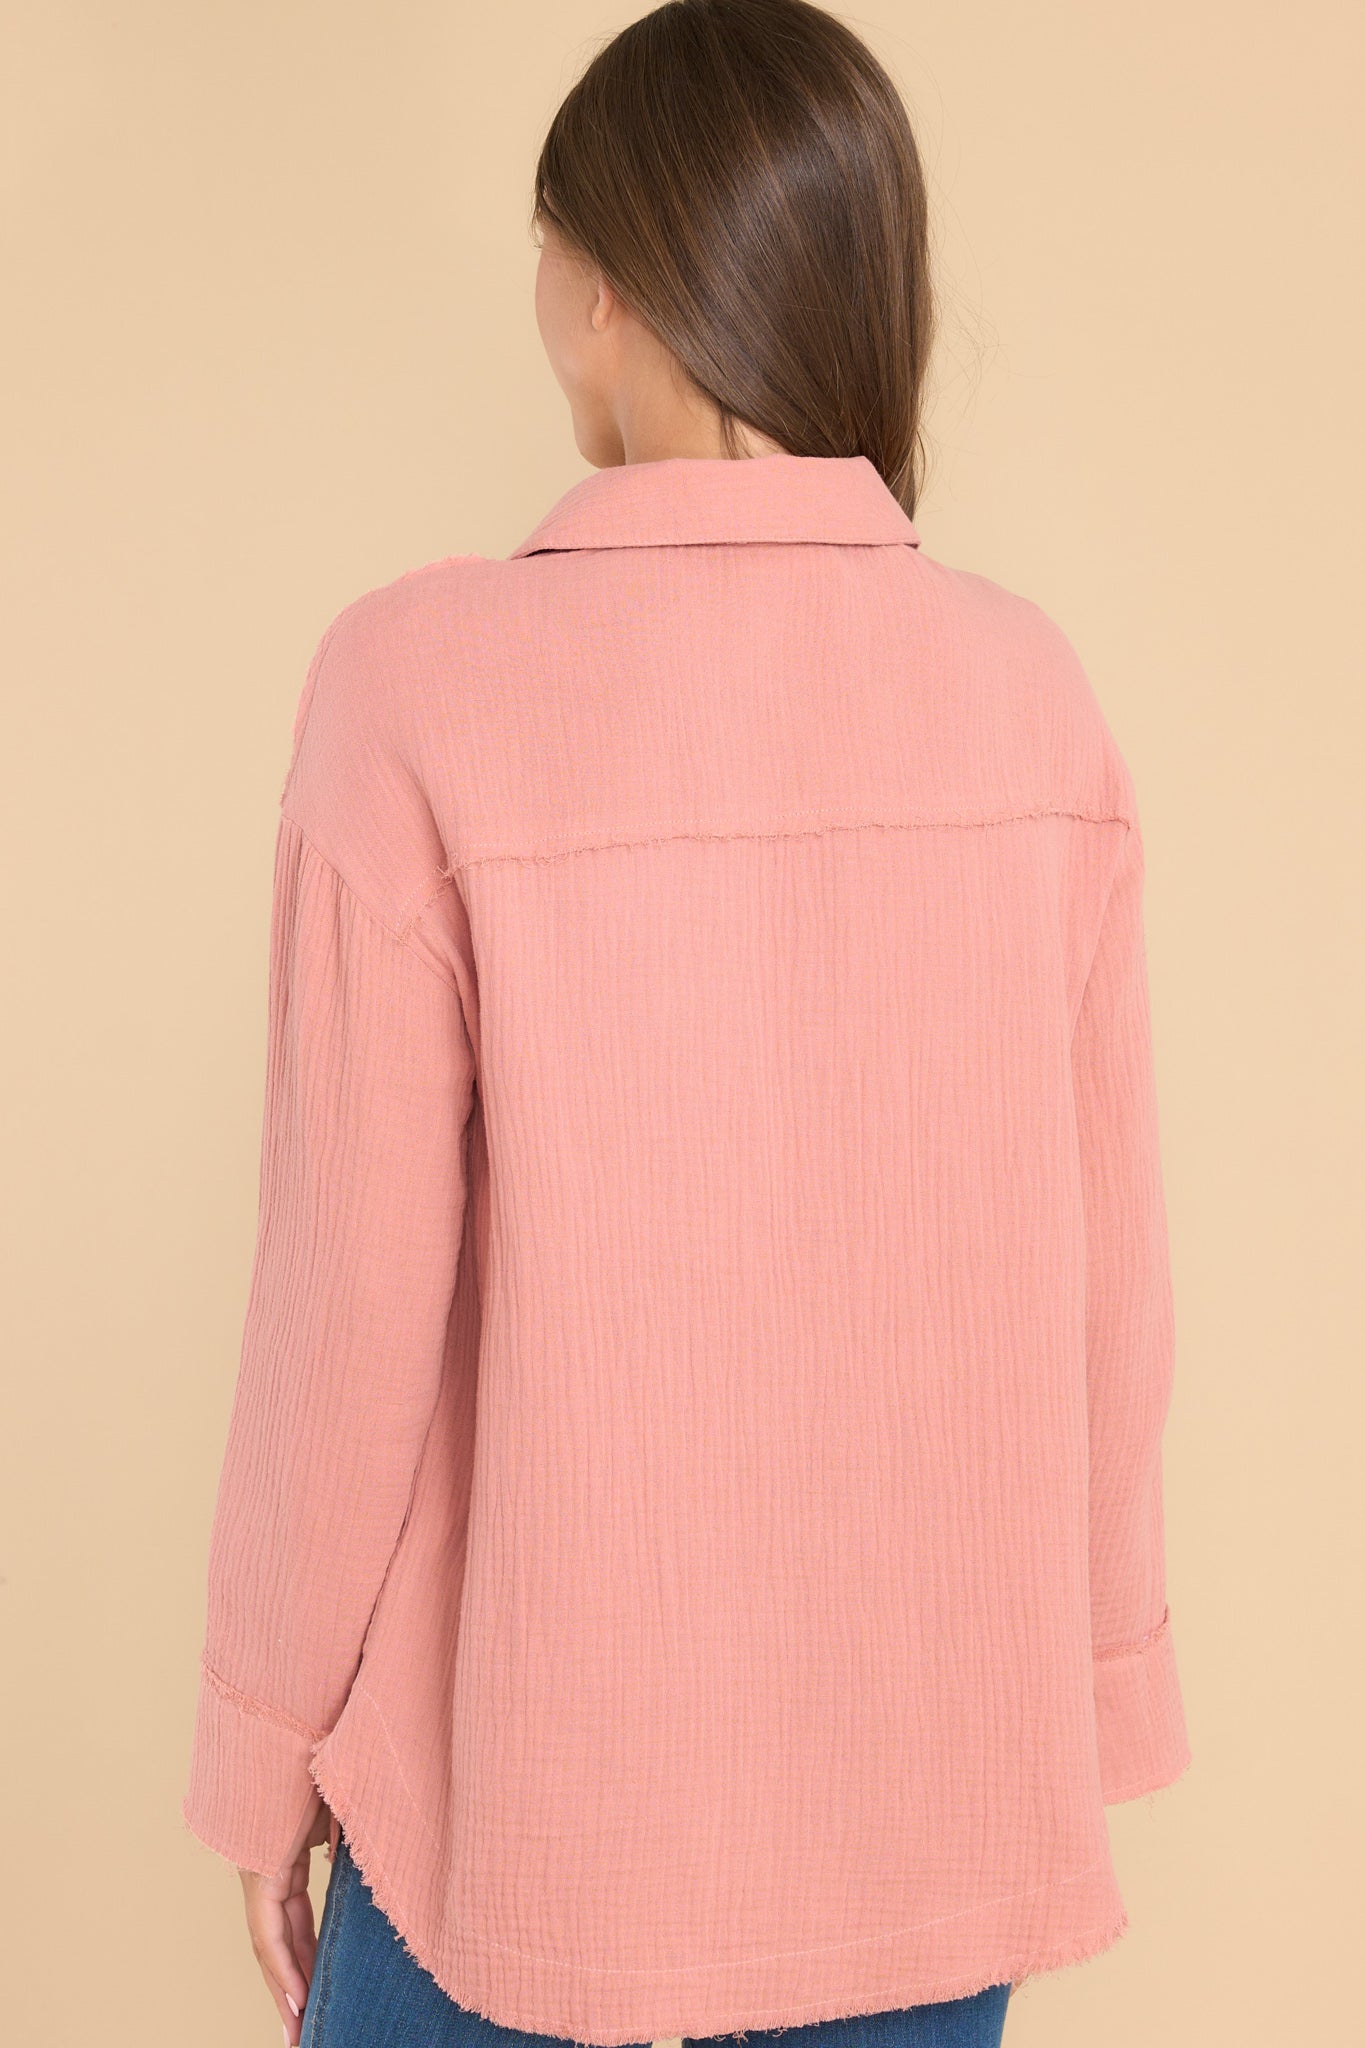 Back view of this top that features a collared neckline, buttons down the front, and two pockets on the bust.